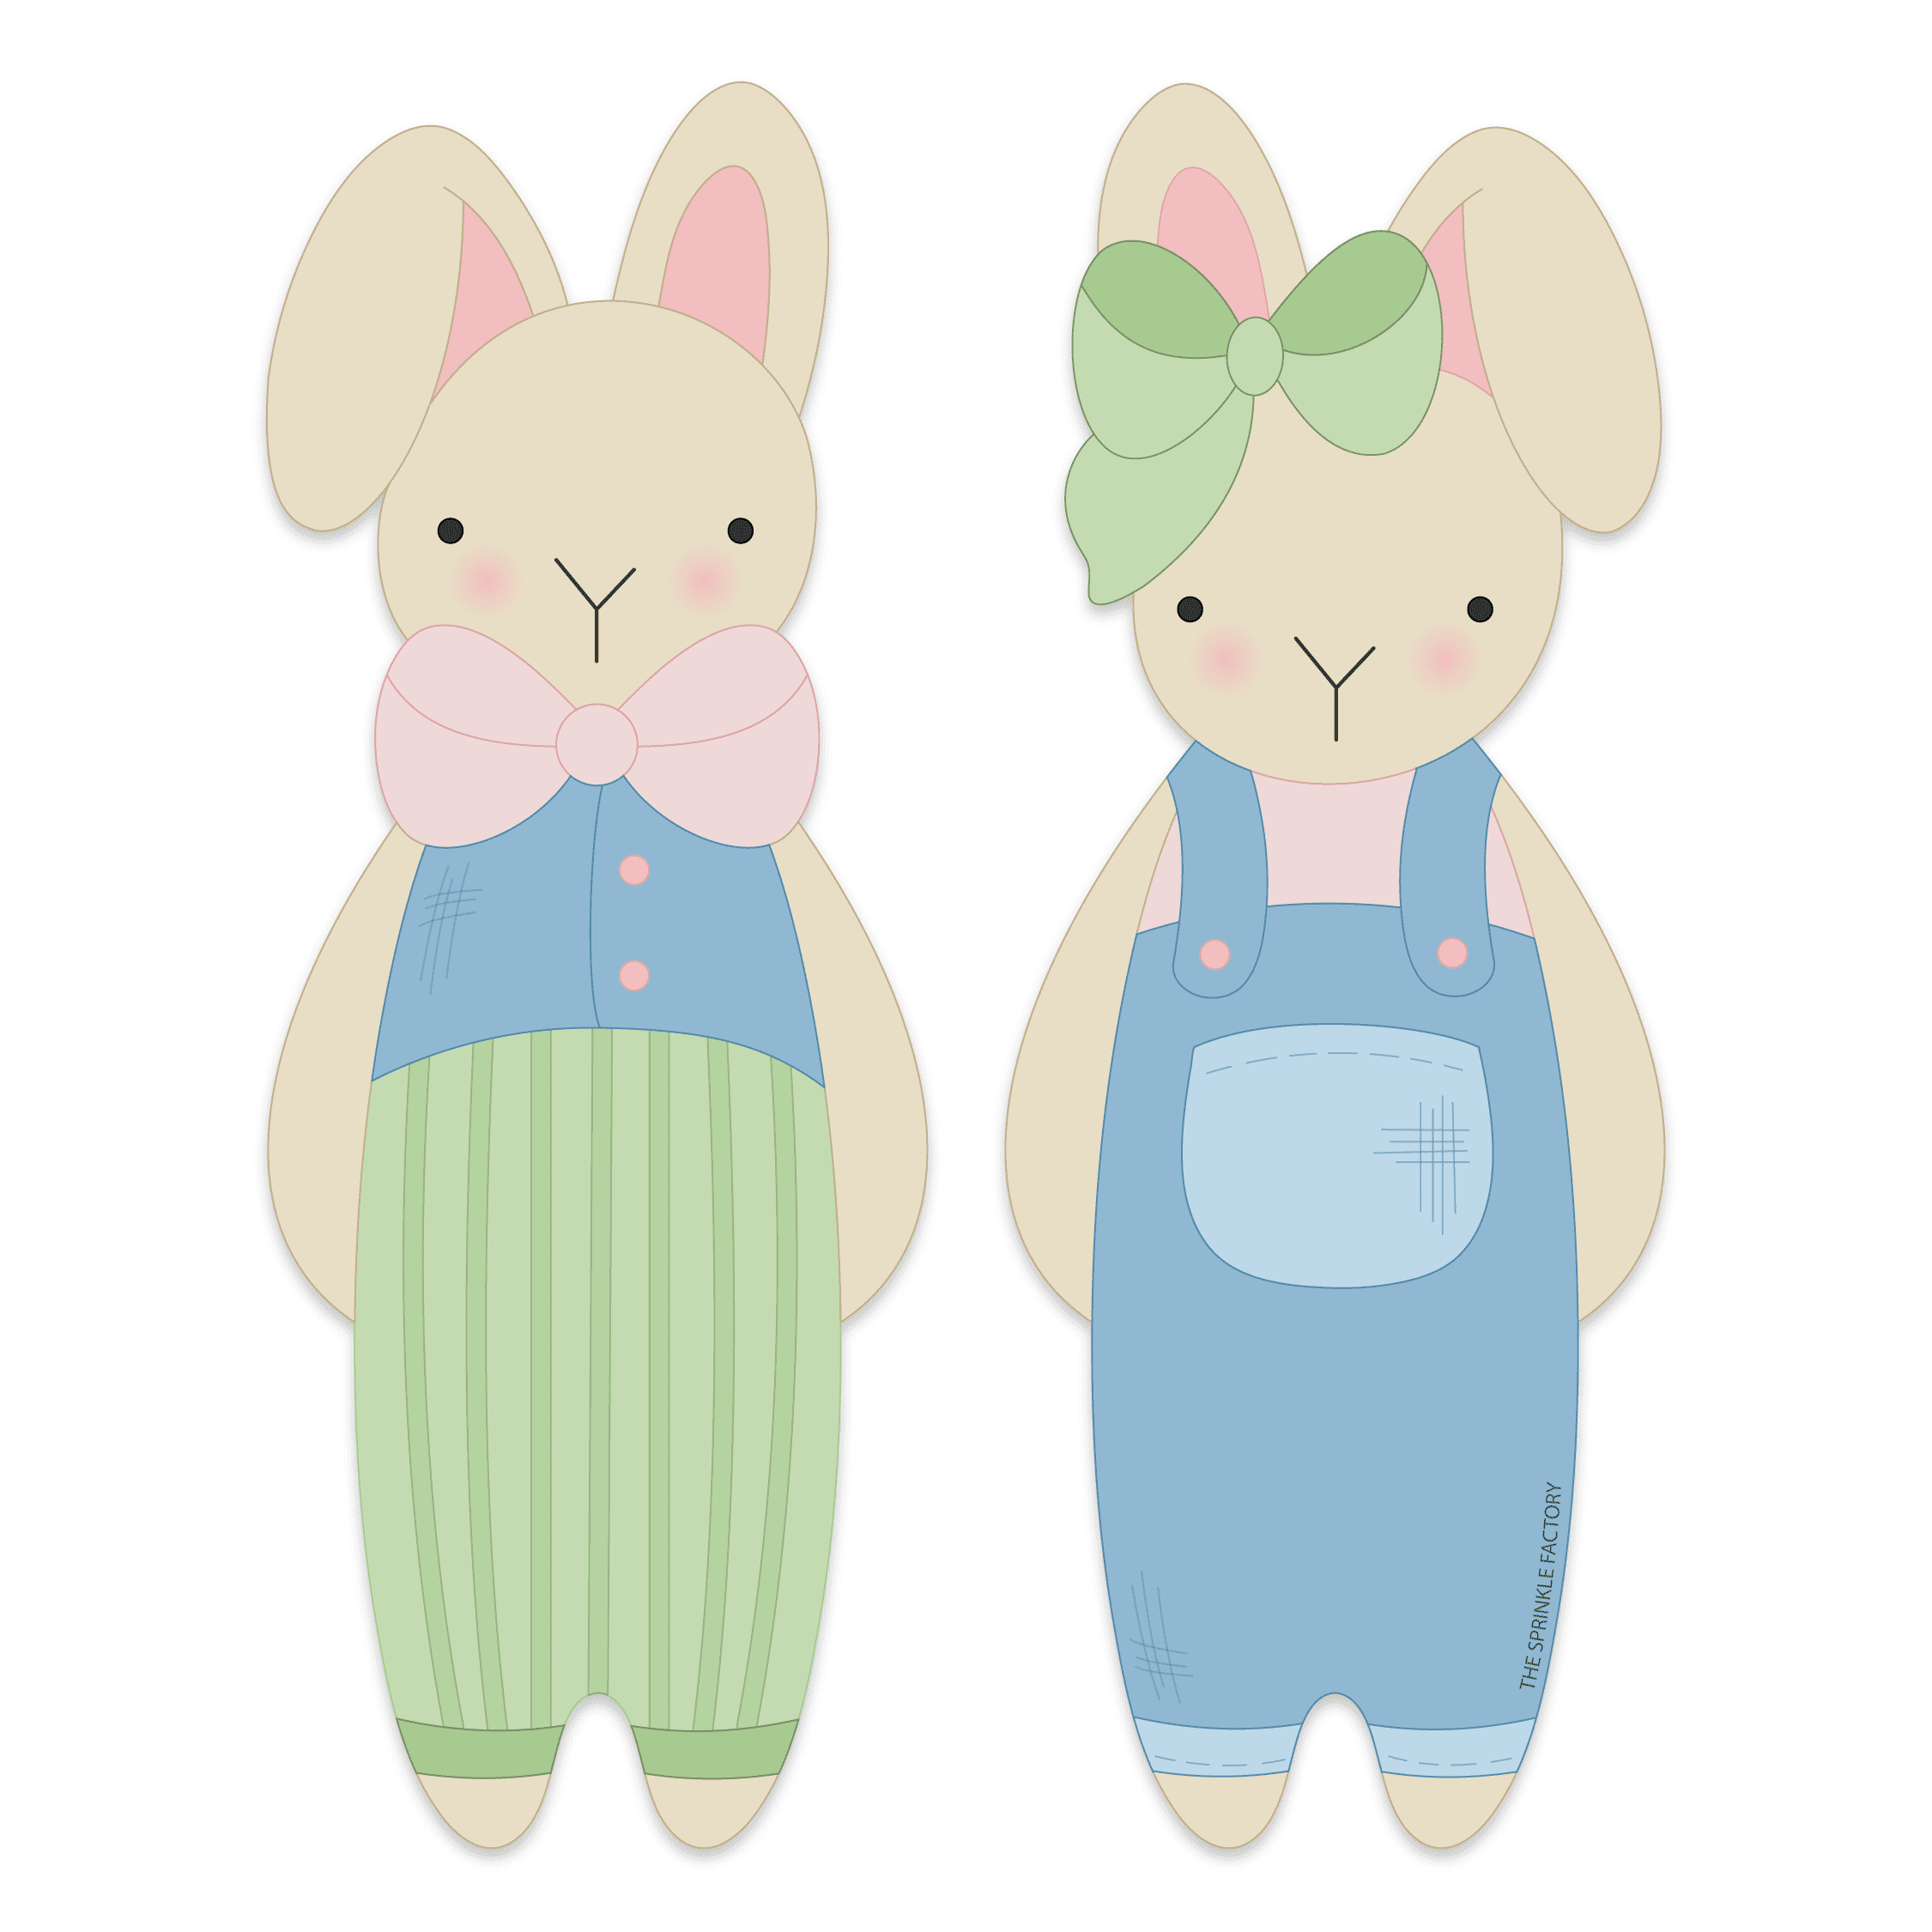 Clipart of a tall brother and sister bunny both with tan fur. Brother has on a blue shirt, pink bow tie and green stripped pants. The sister is wearing green overalls, pink shirt and a green bow on her ear.